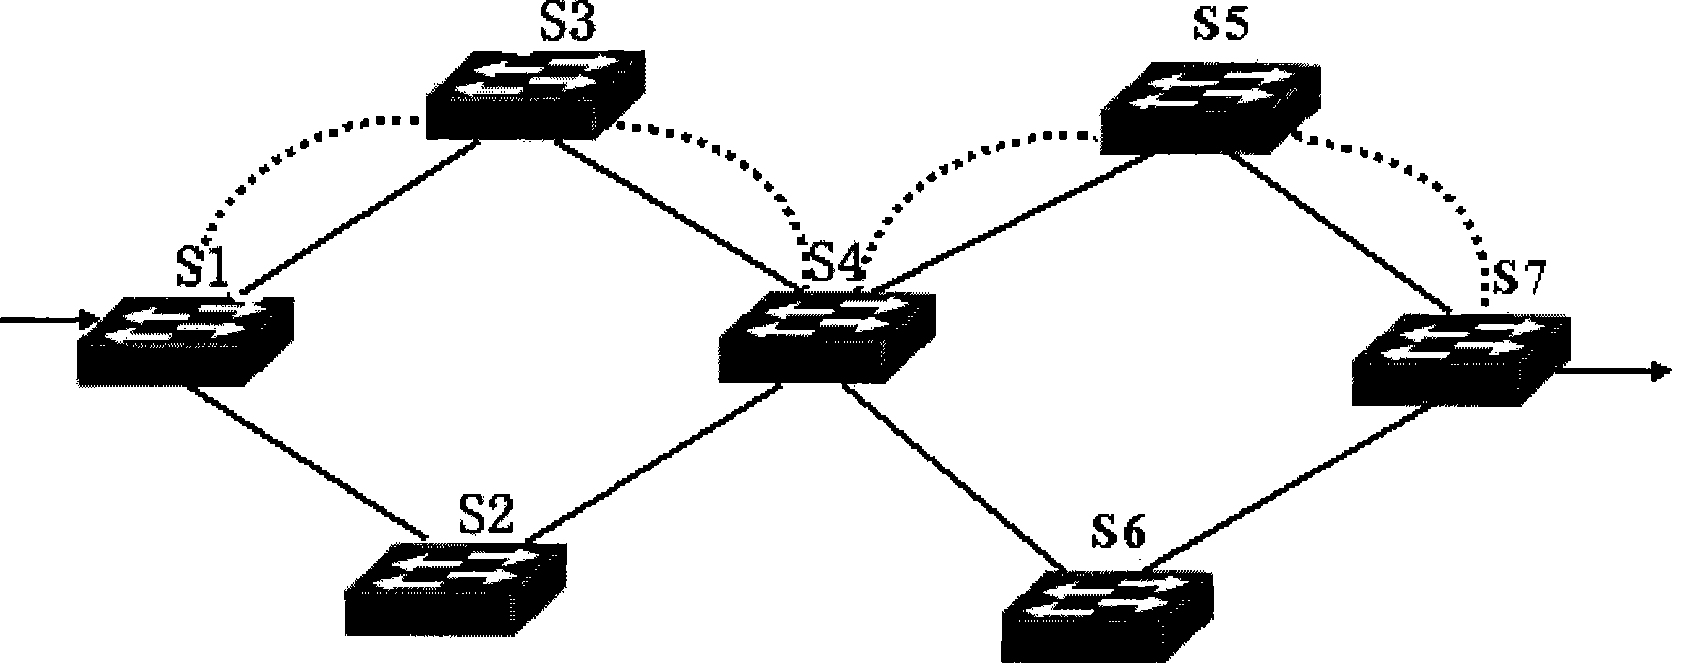 Connection-oriented service configuration and management method